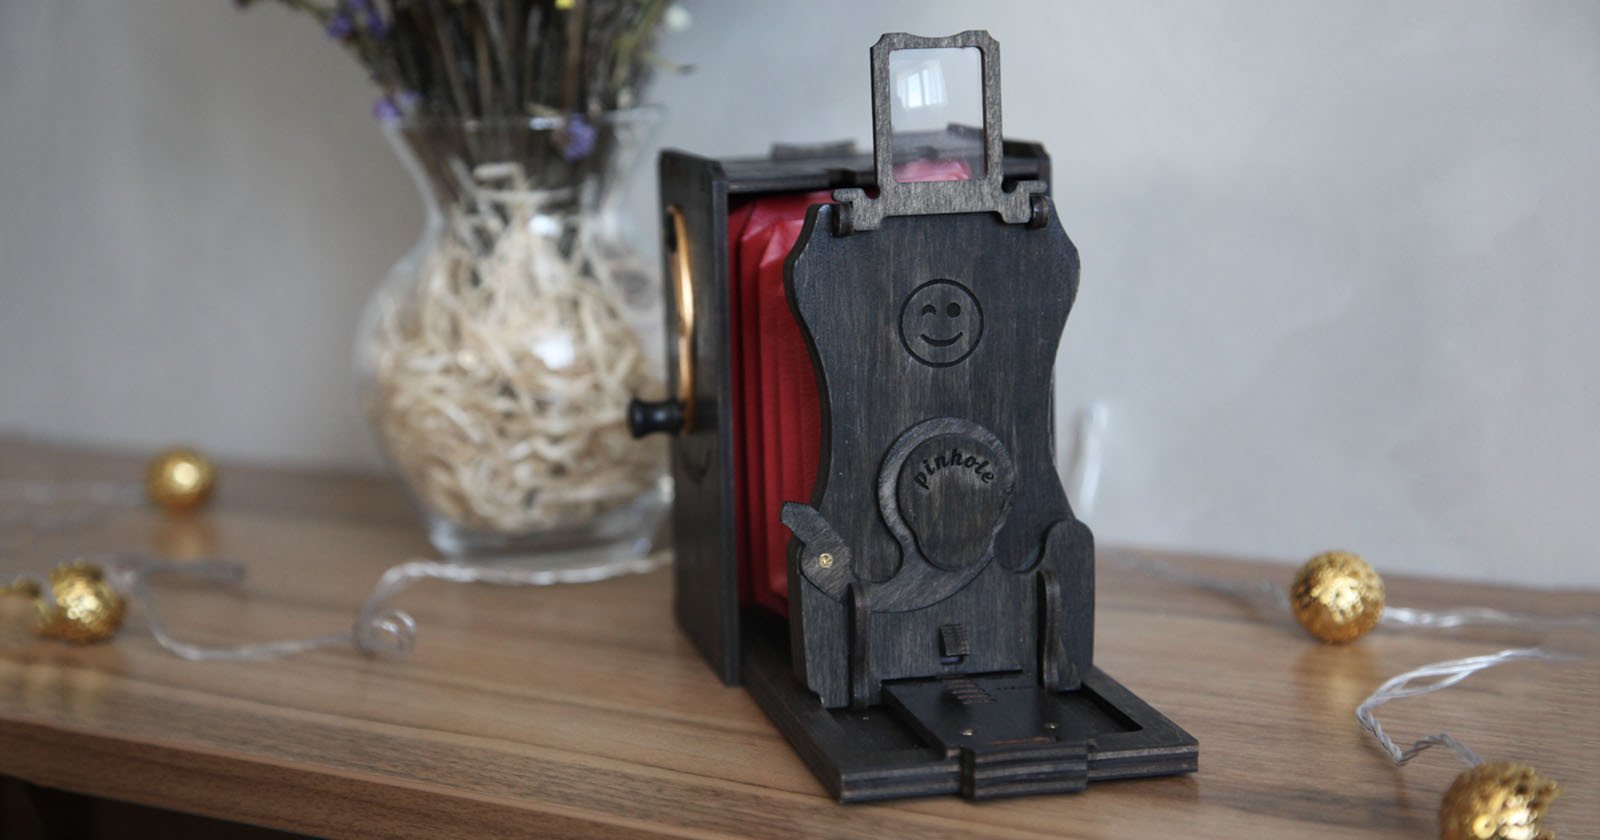 The Jollylook Pinhole is a DIY Bellows Camera That Takes Instax Film